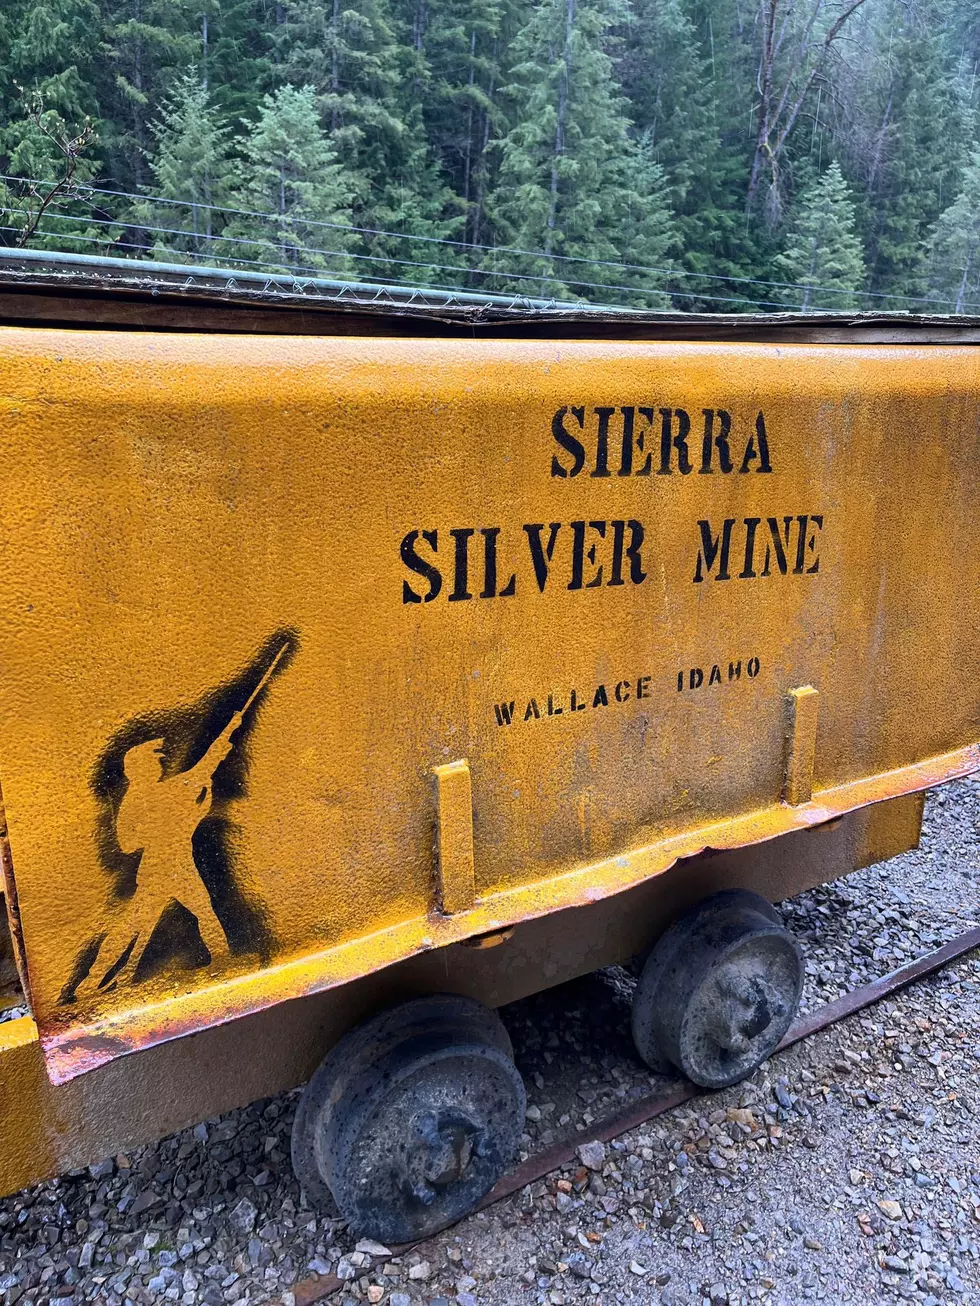 Explore Amazing Silver Mine Just a Few Hours From Tri-Cities